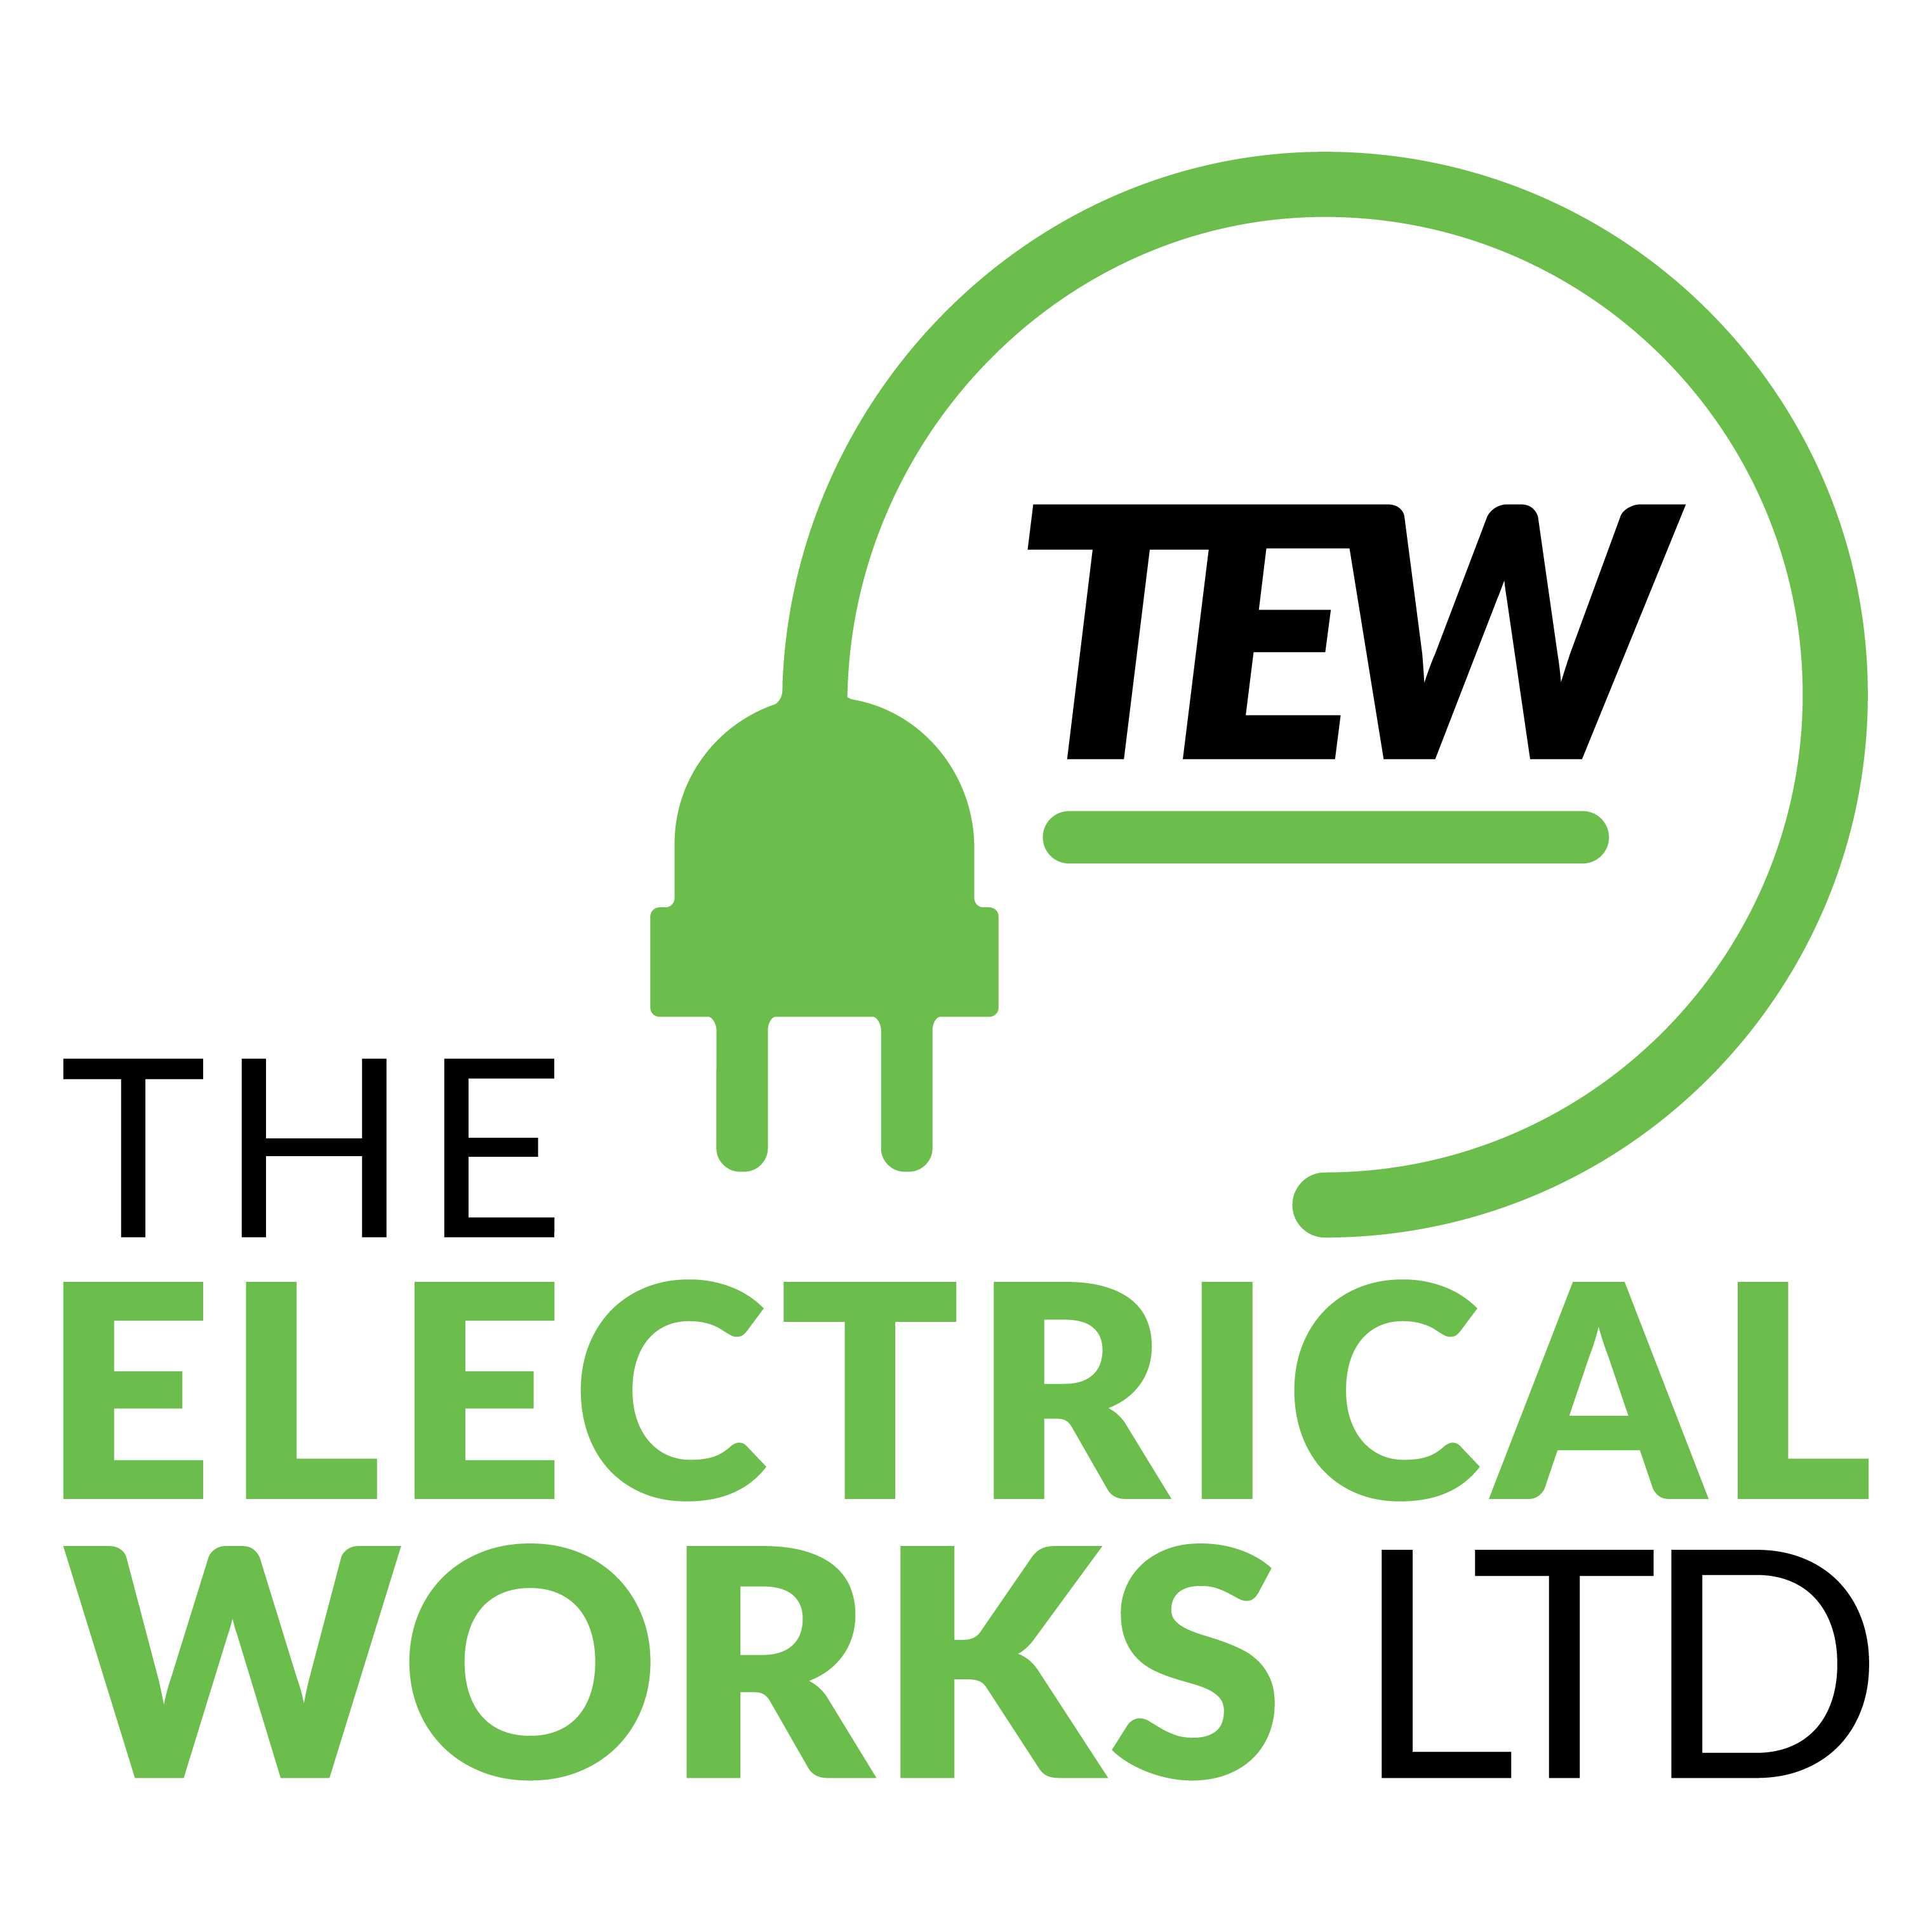 The Electrical Works LTD